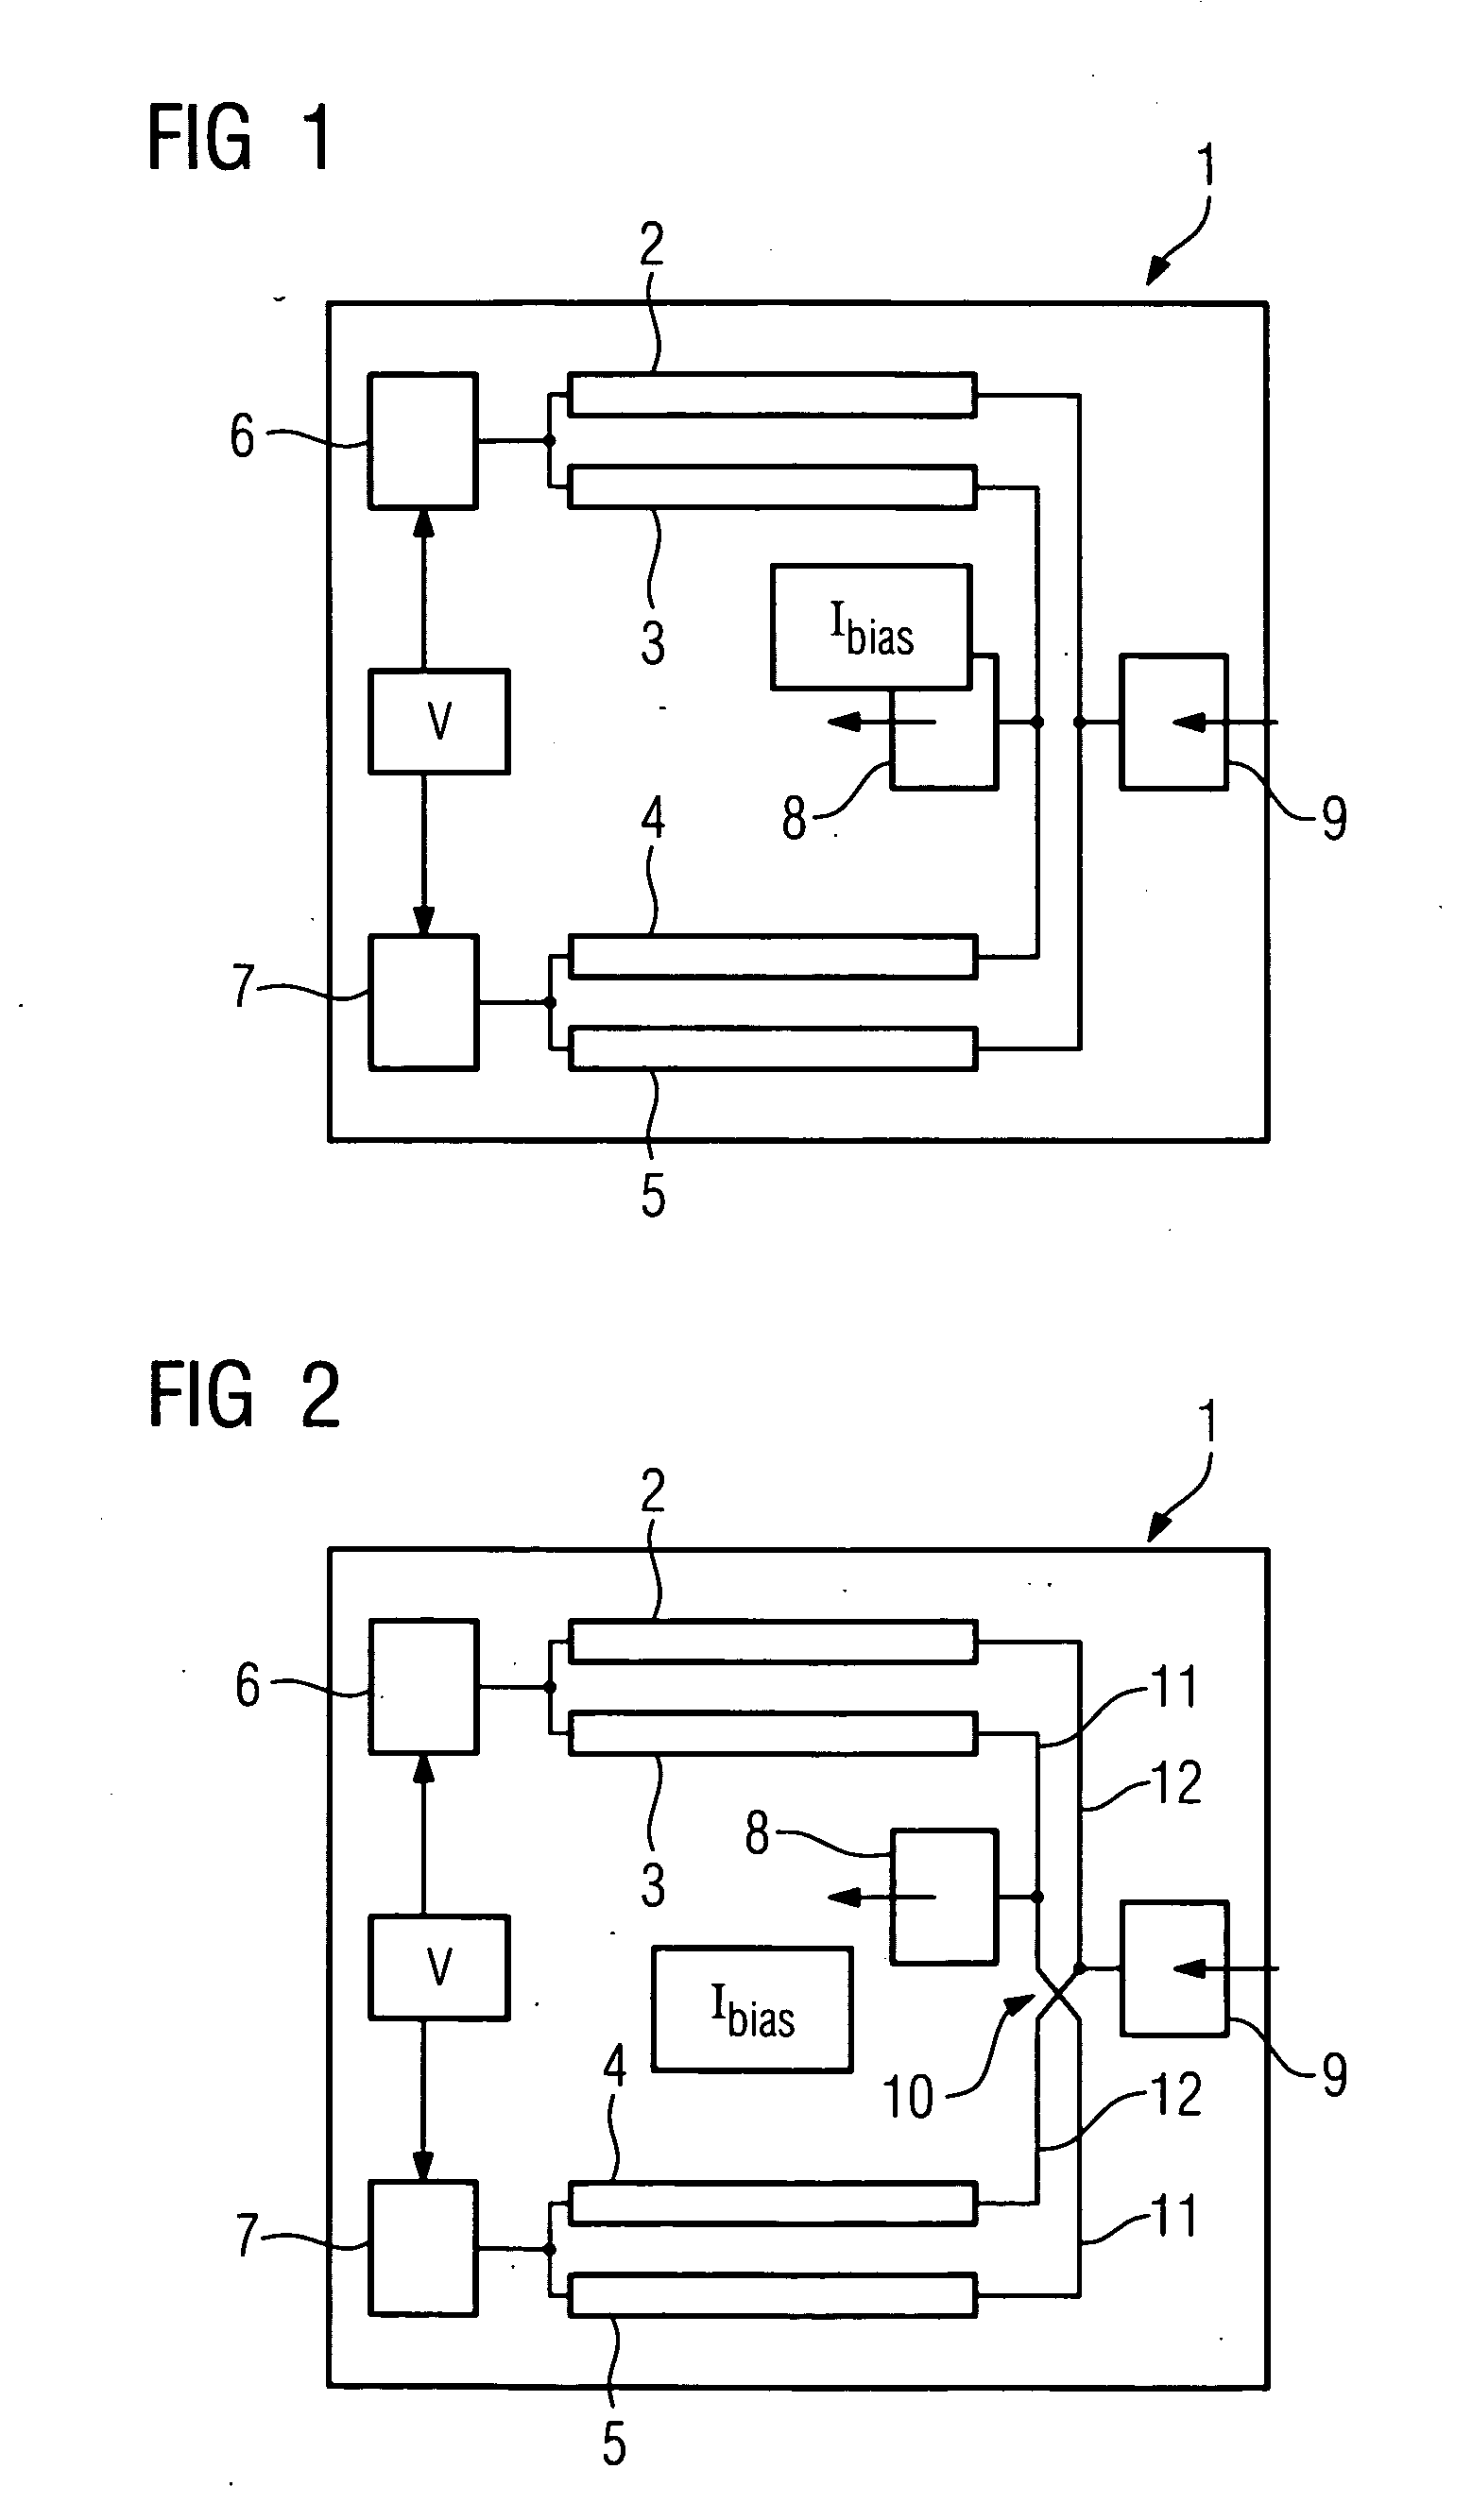 Device For Detecting Defects Which Are Deep And Close To The Surface In Electrically Conductive Materials In A Nondestructive Manner